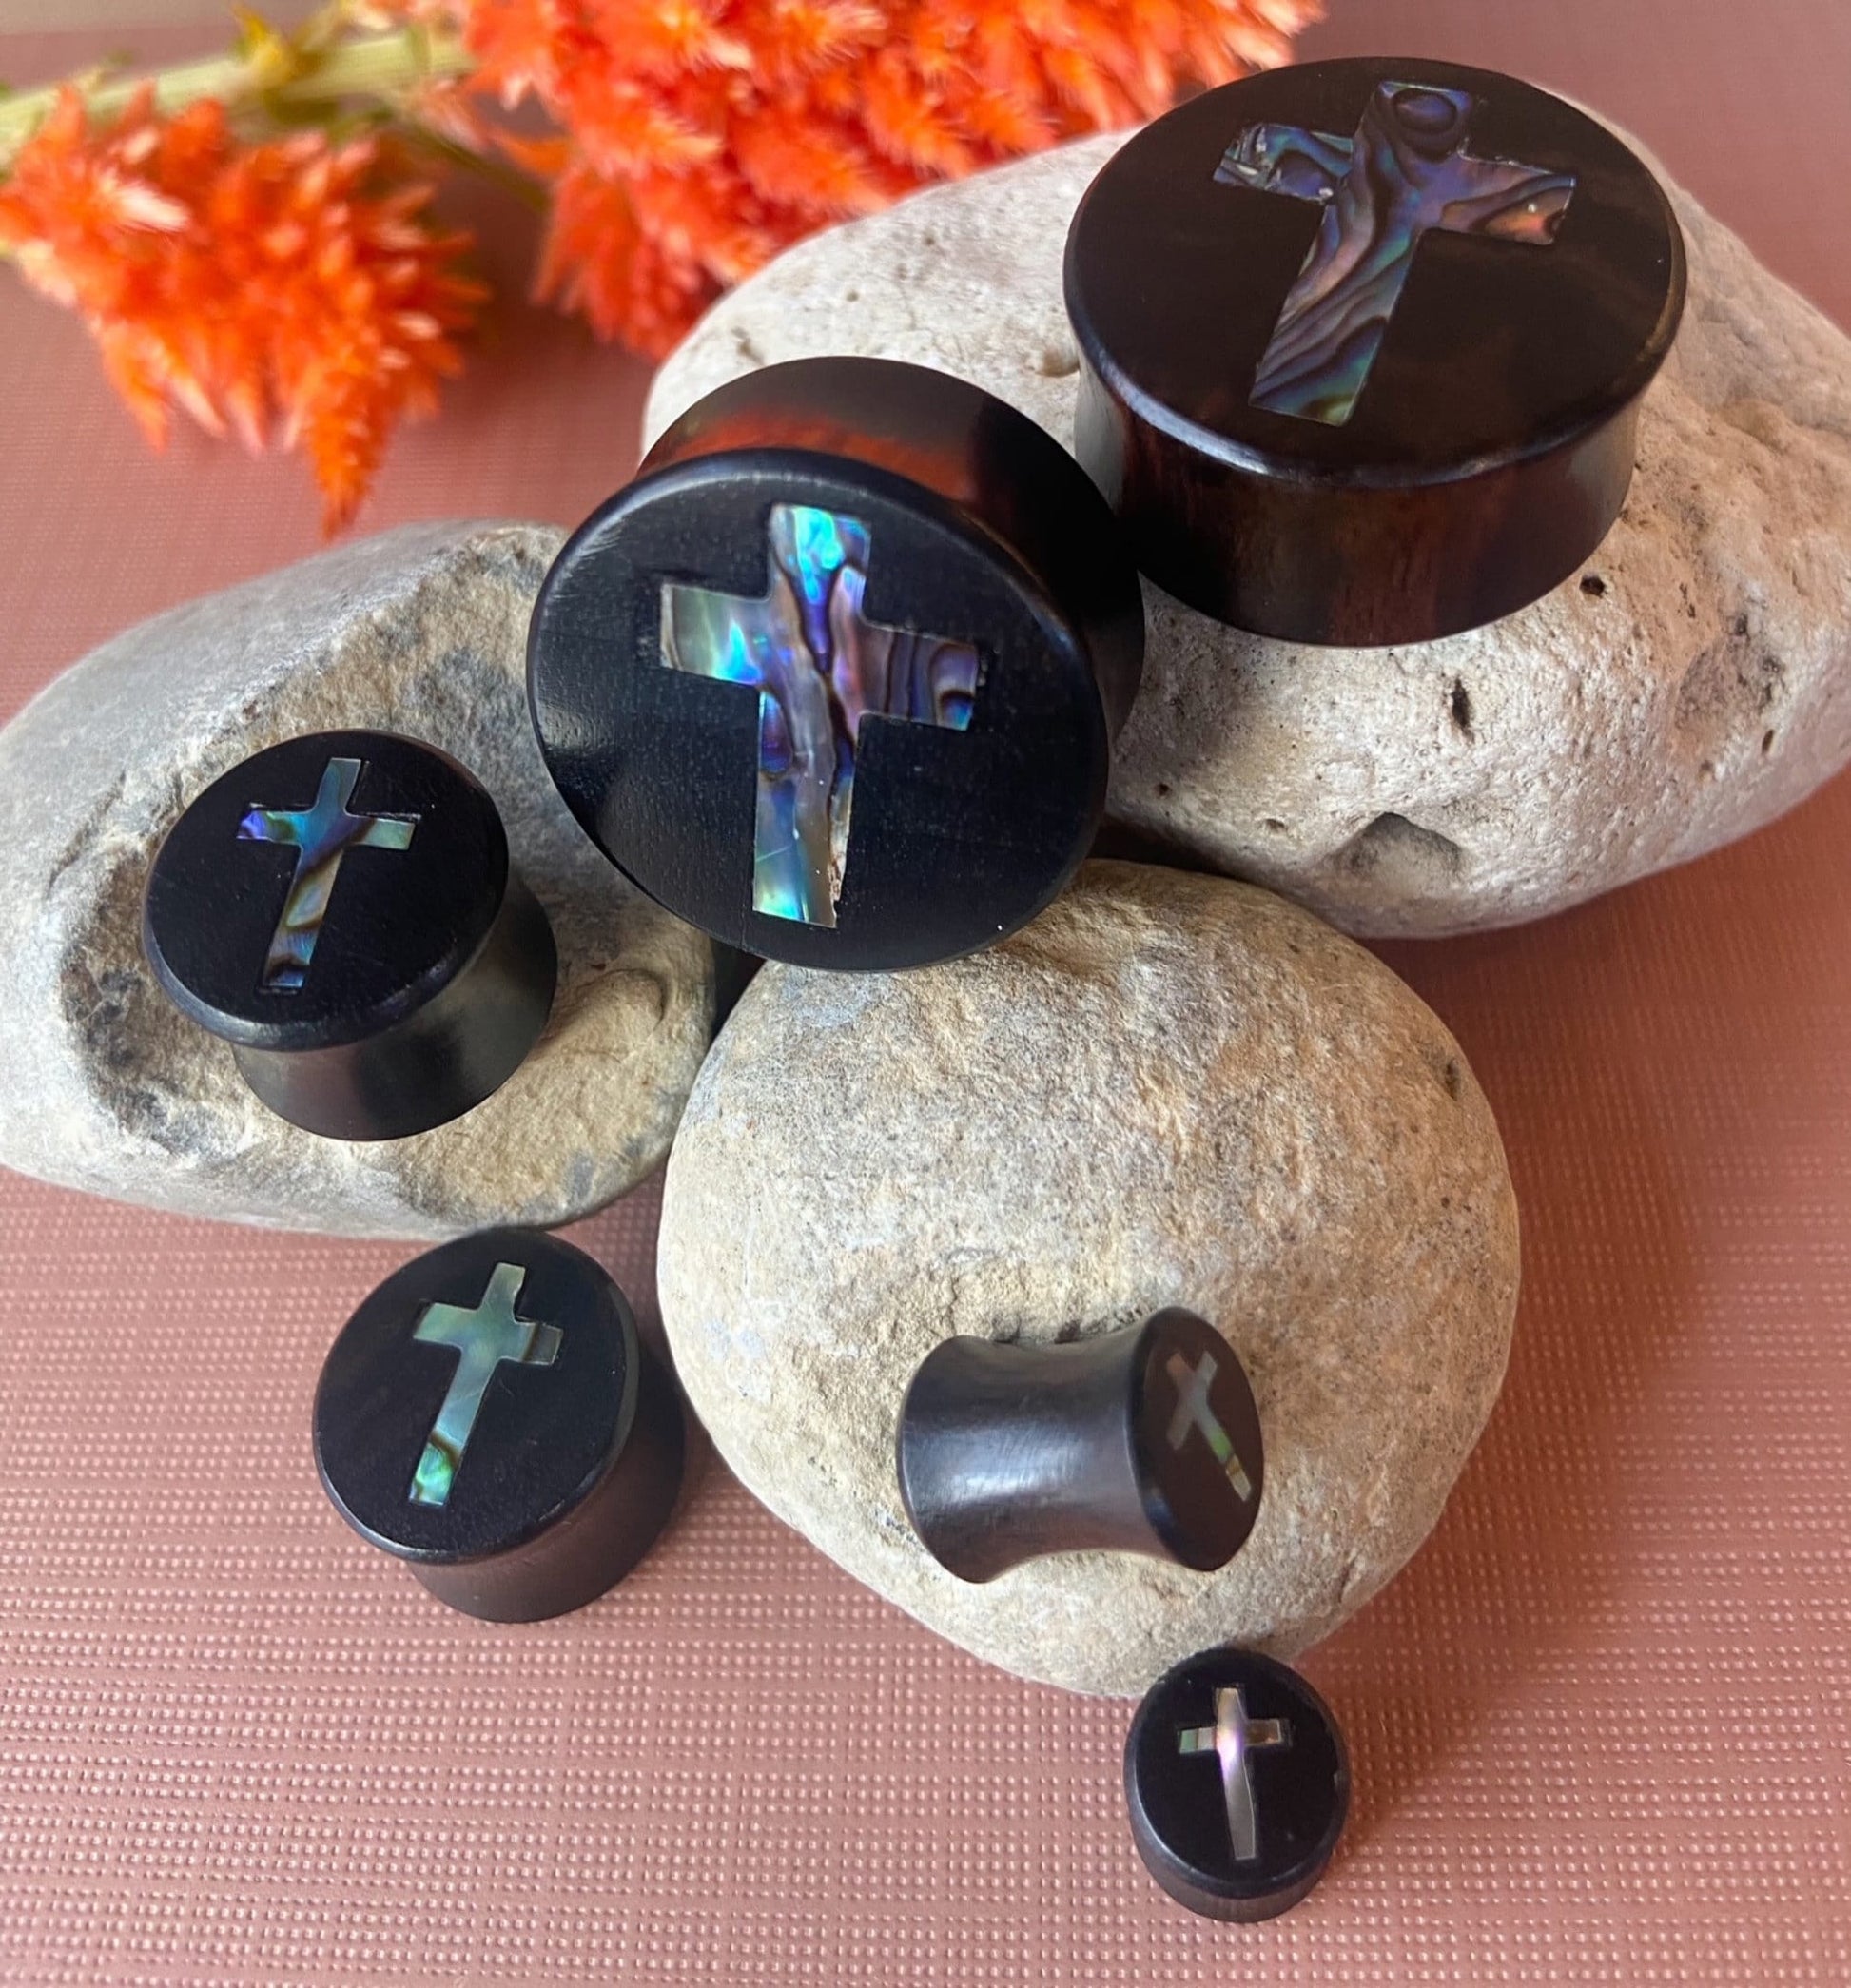 PAIR of Stunning Abalone Shell Cross Inlay Black Wood Saddle Plugs/Tunnels - Gauges 0g (8mm) thru 1" (25mm) available!